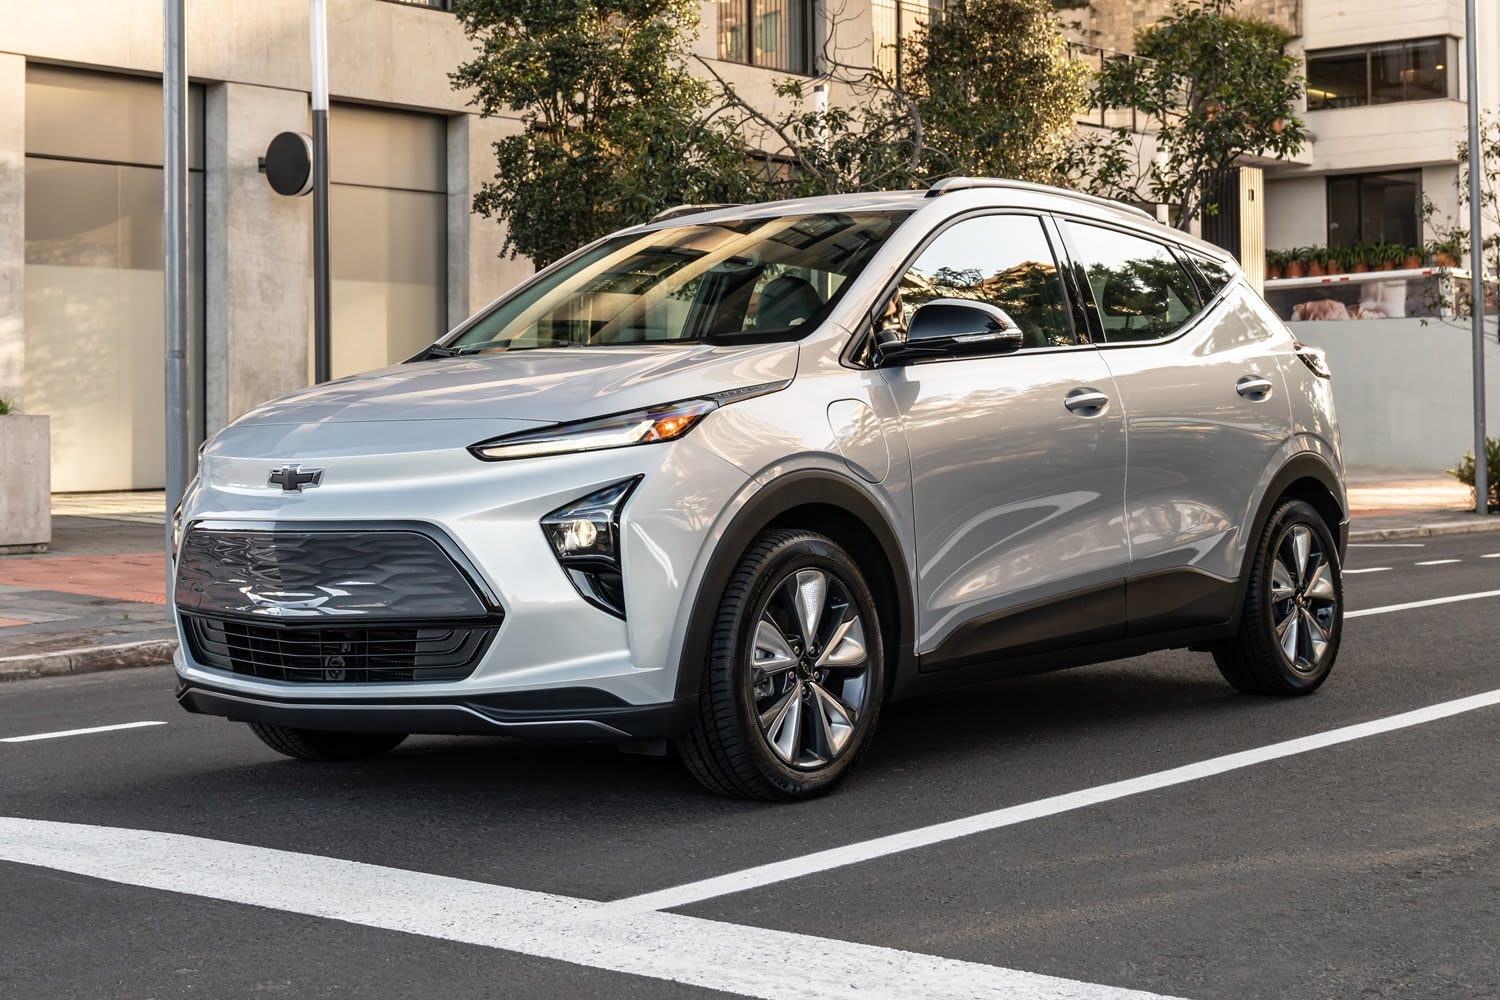 GM plans to lead legacy OEMs in 2023 with 7 Ultium-based EVs